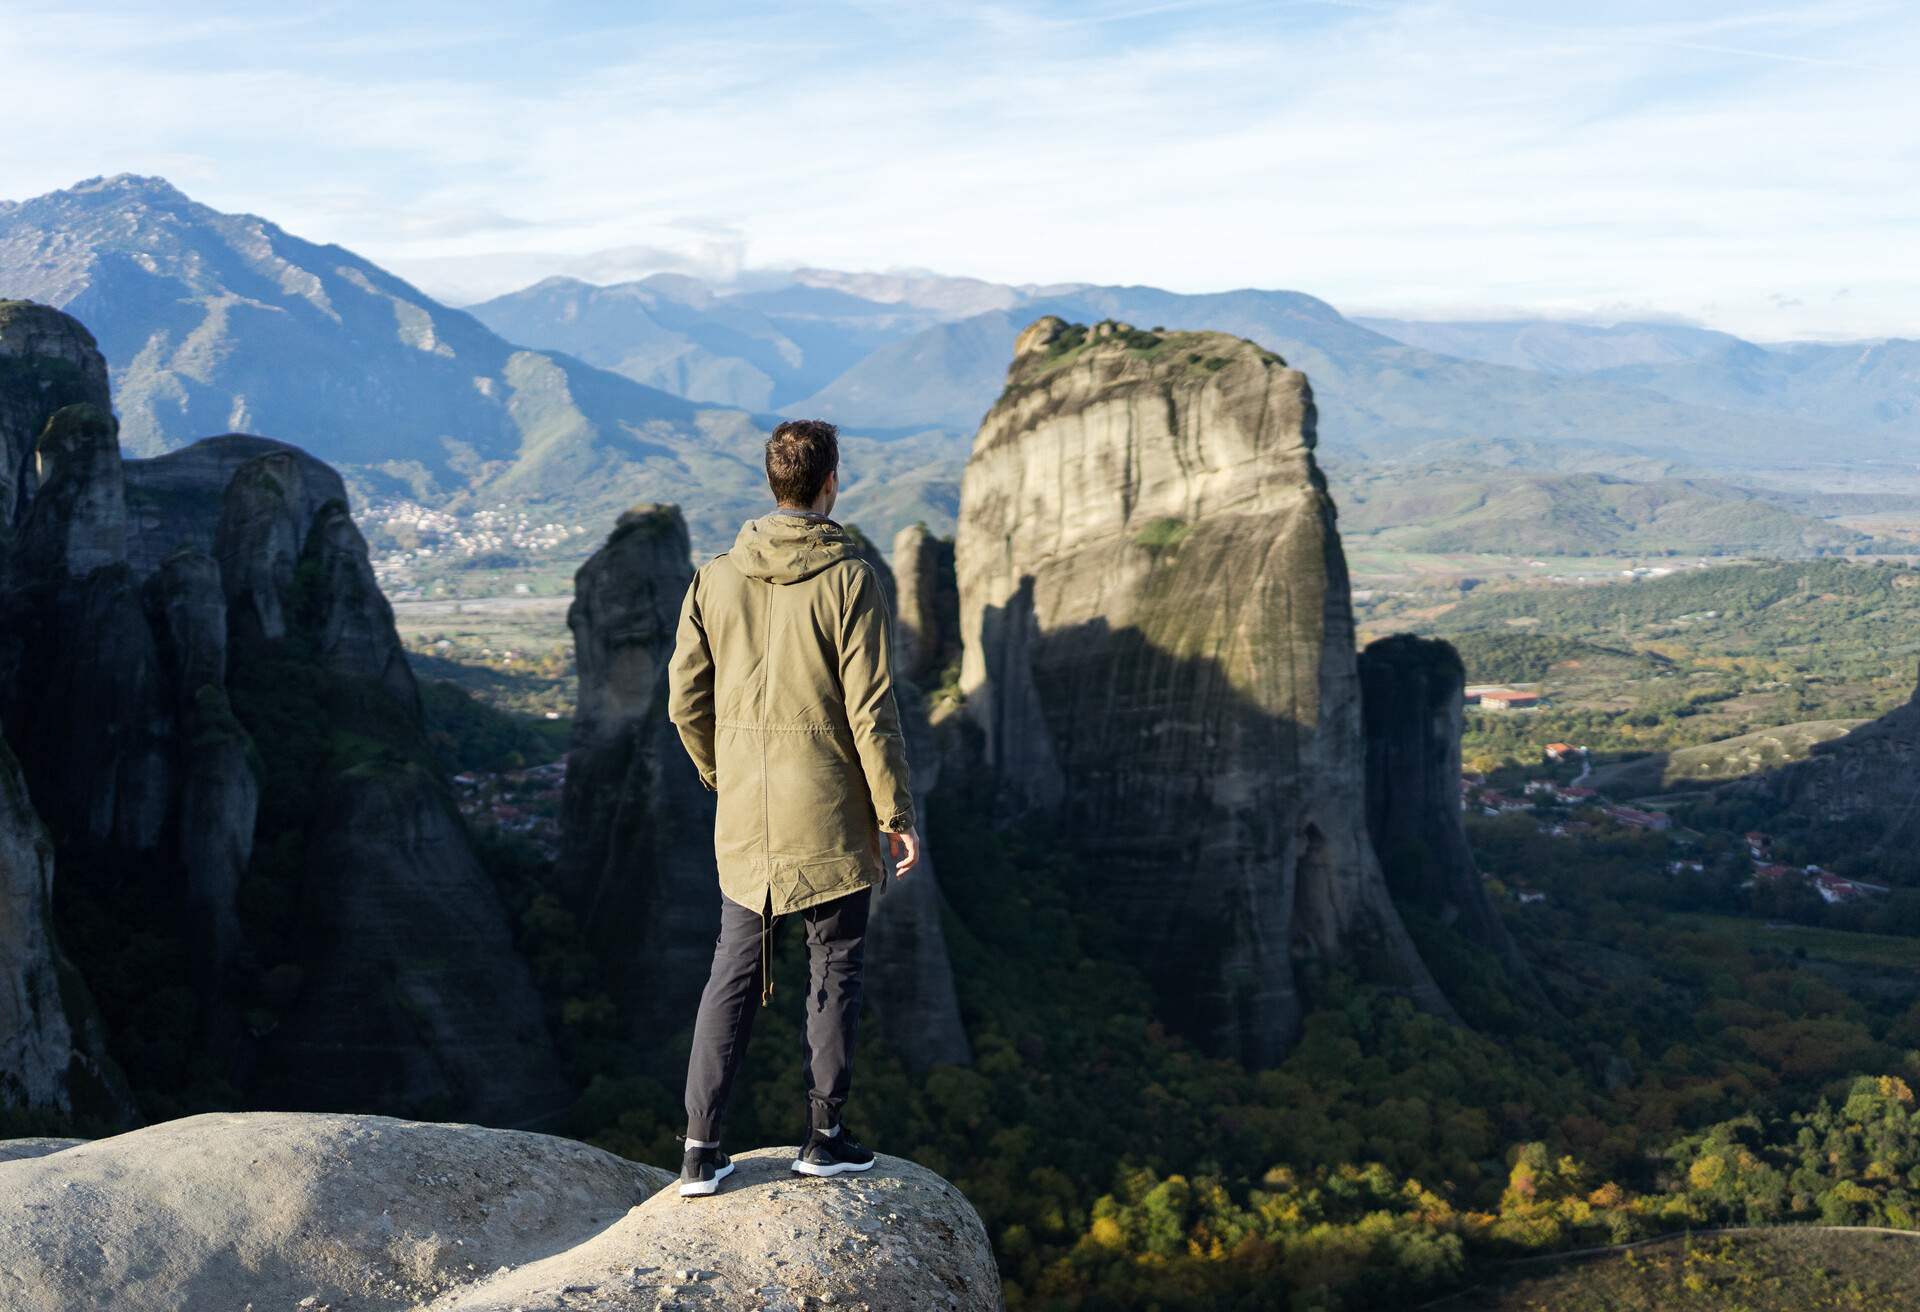 dest_greece_meteora_theme_fall_winter_gettyimages-1206824432_universal_within-usage-period_85284